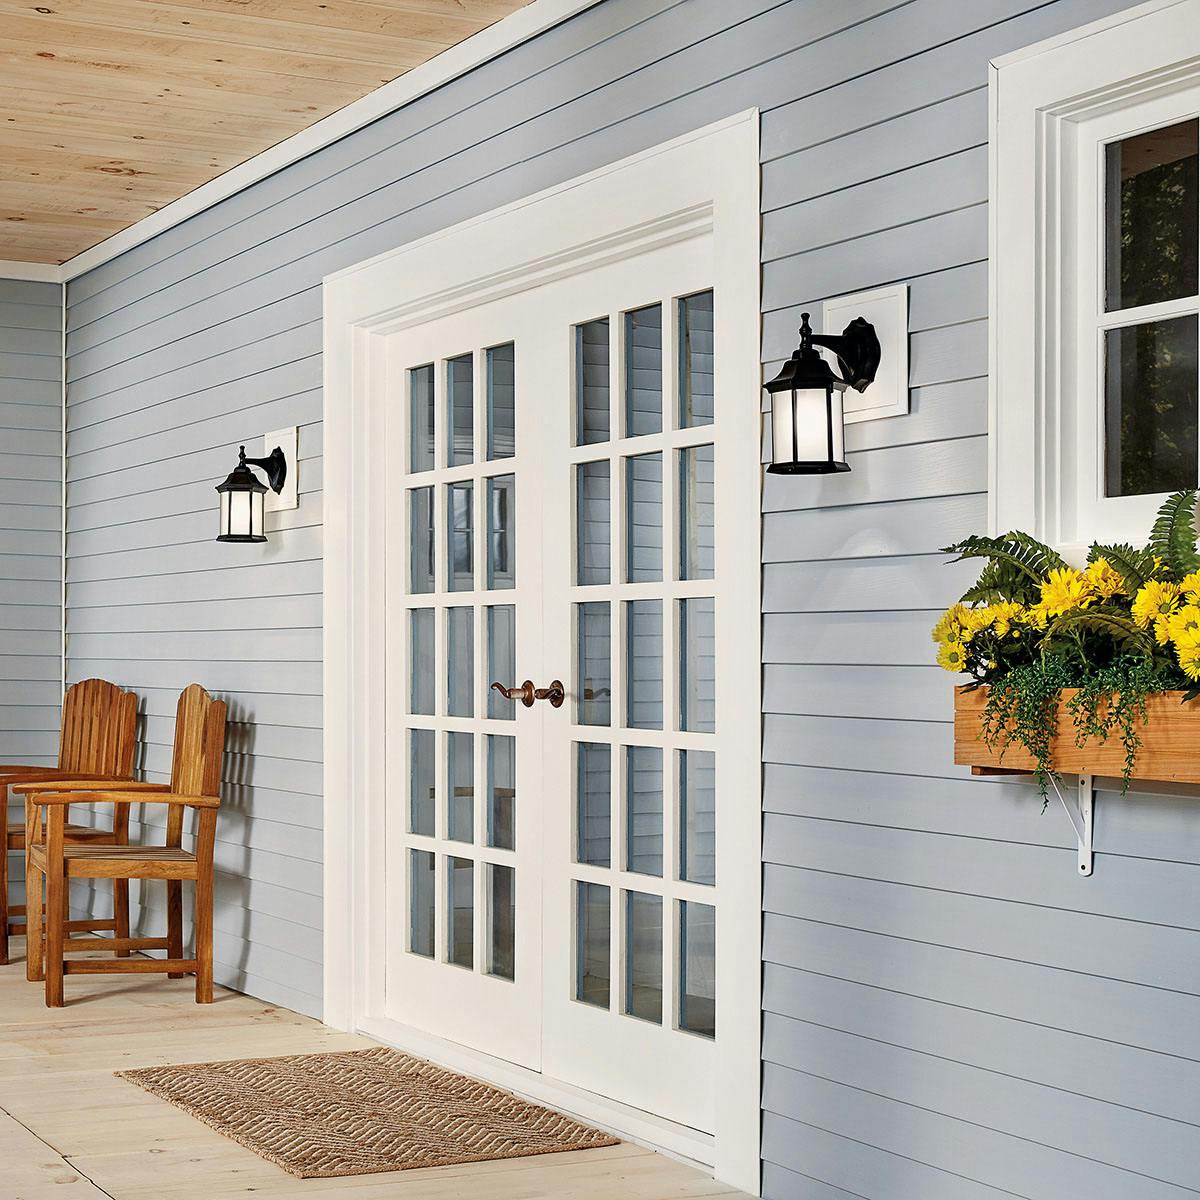 Day time Exterior image featuring Chesapeake outdoor wall light 9776BKS